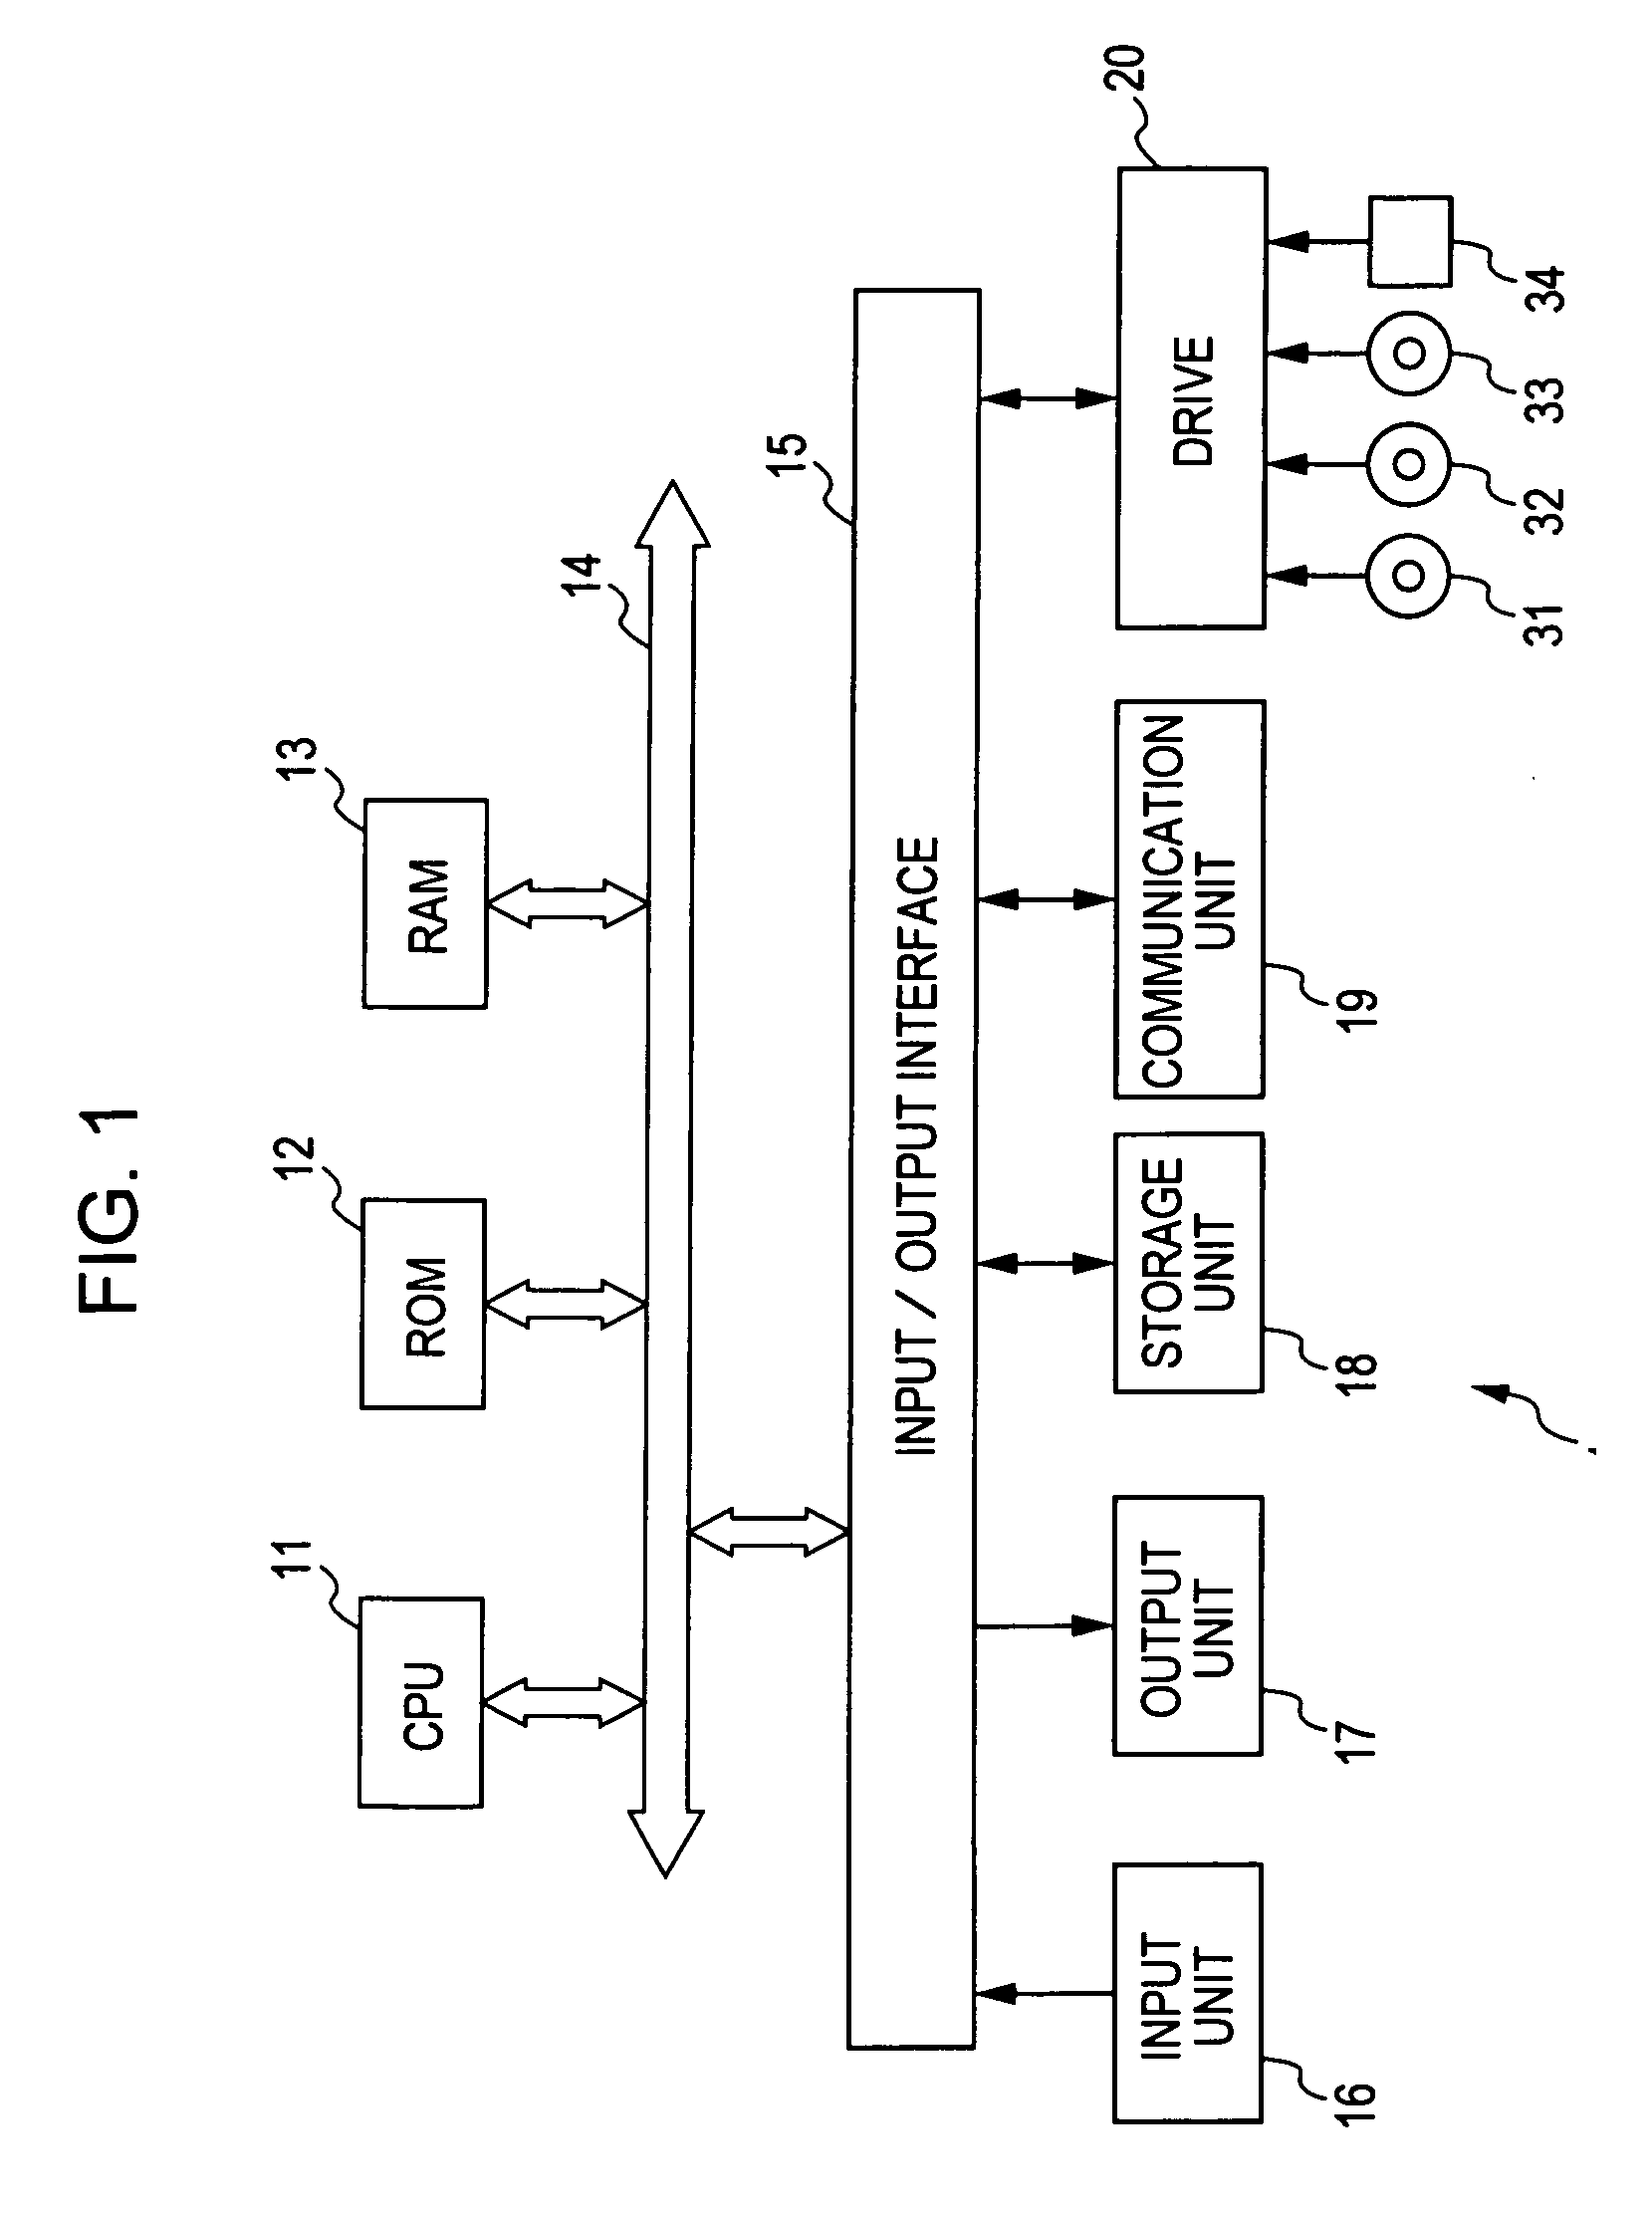 Image processing apparatus and method, and recording medium and program used therewith